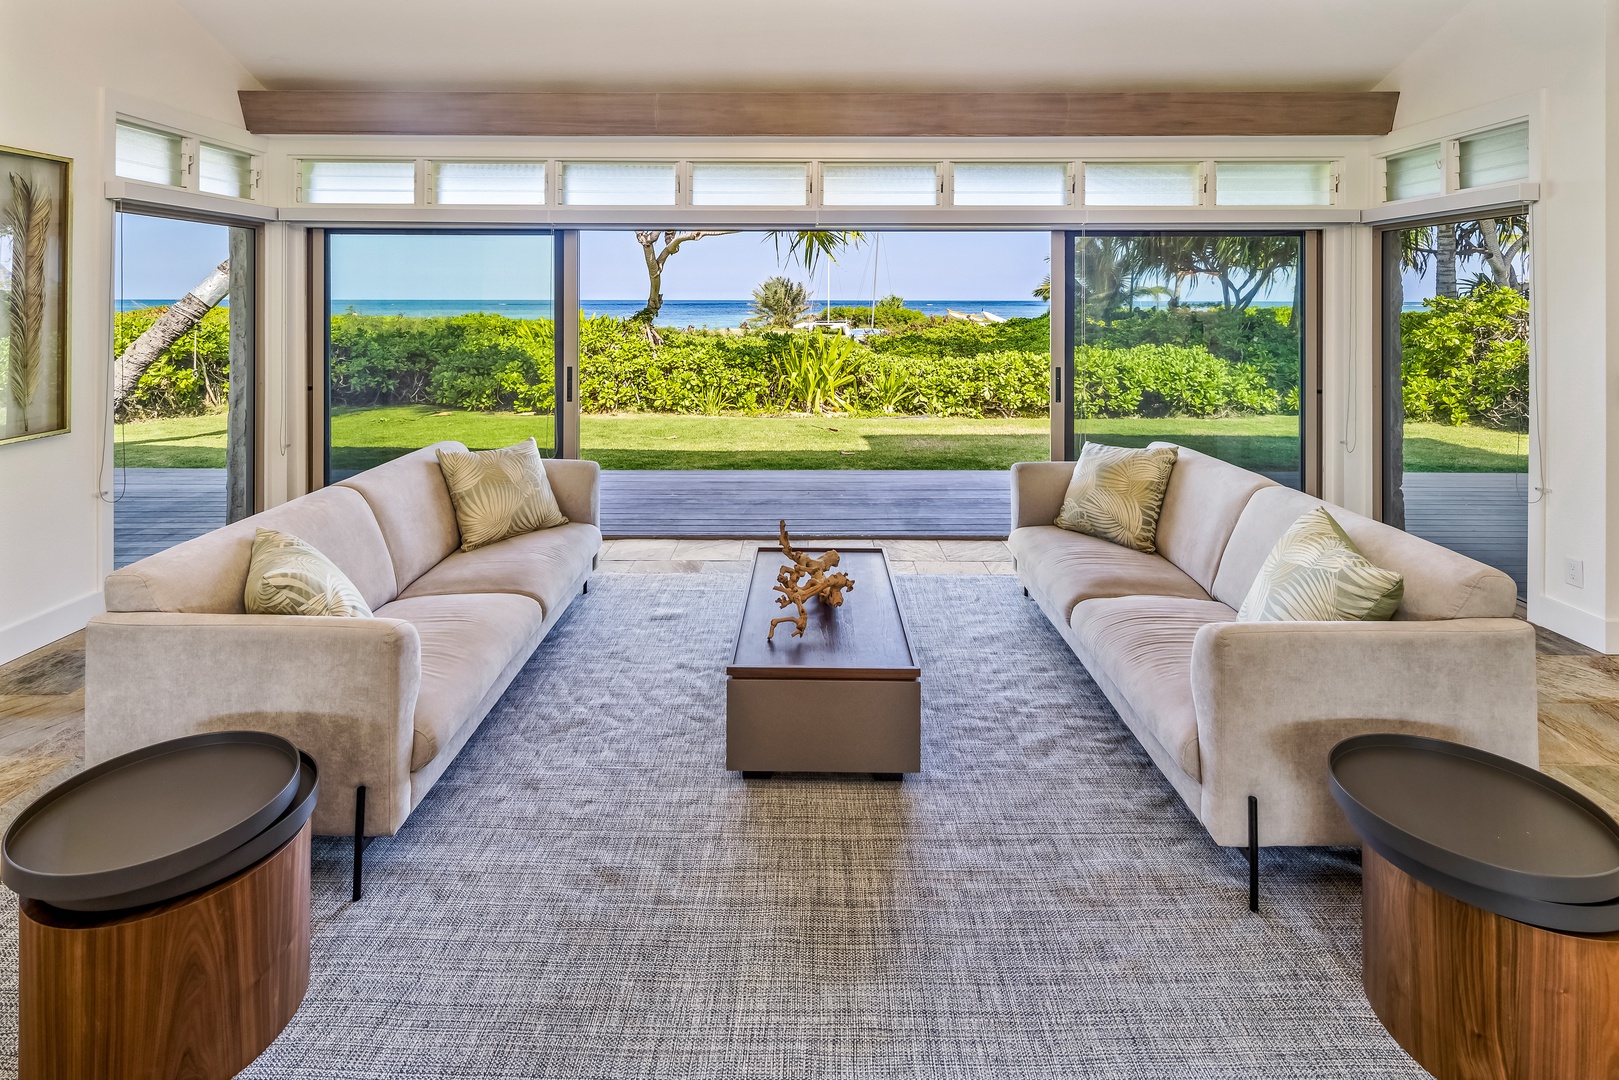 Kailua Vacation Rentals, Na Makana Villa - Easily transition between indoor and outdoor living thanks to the large, glass sliding doors to the back yard